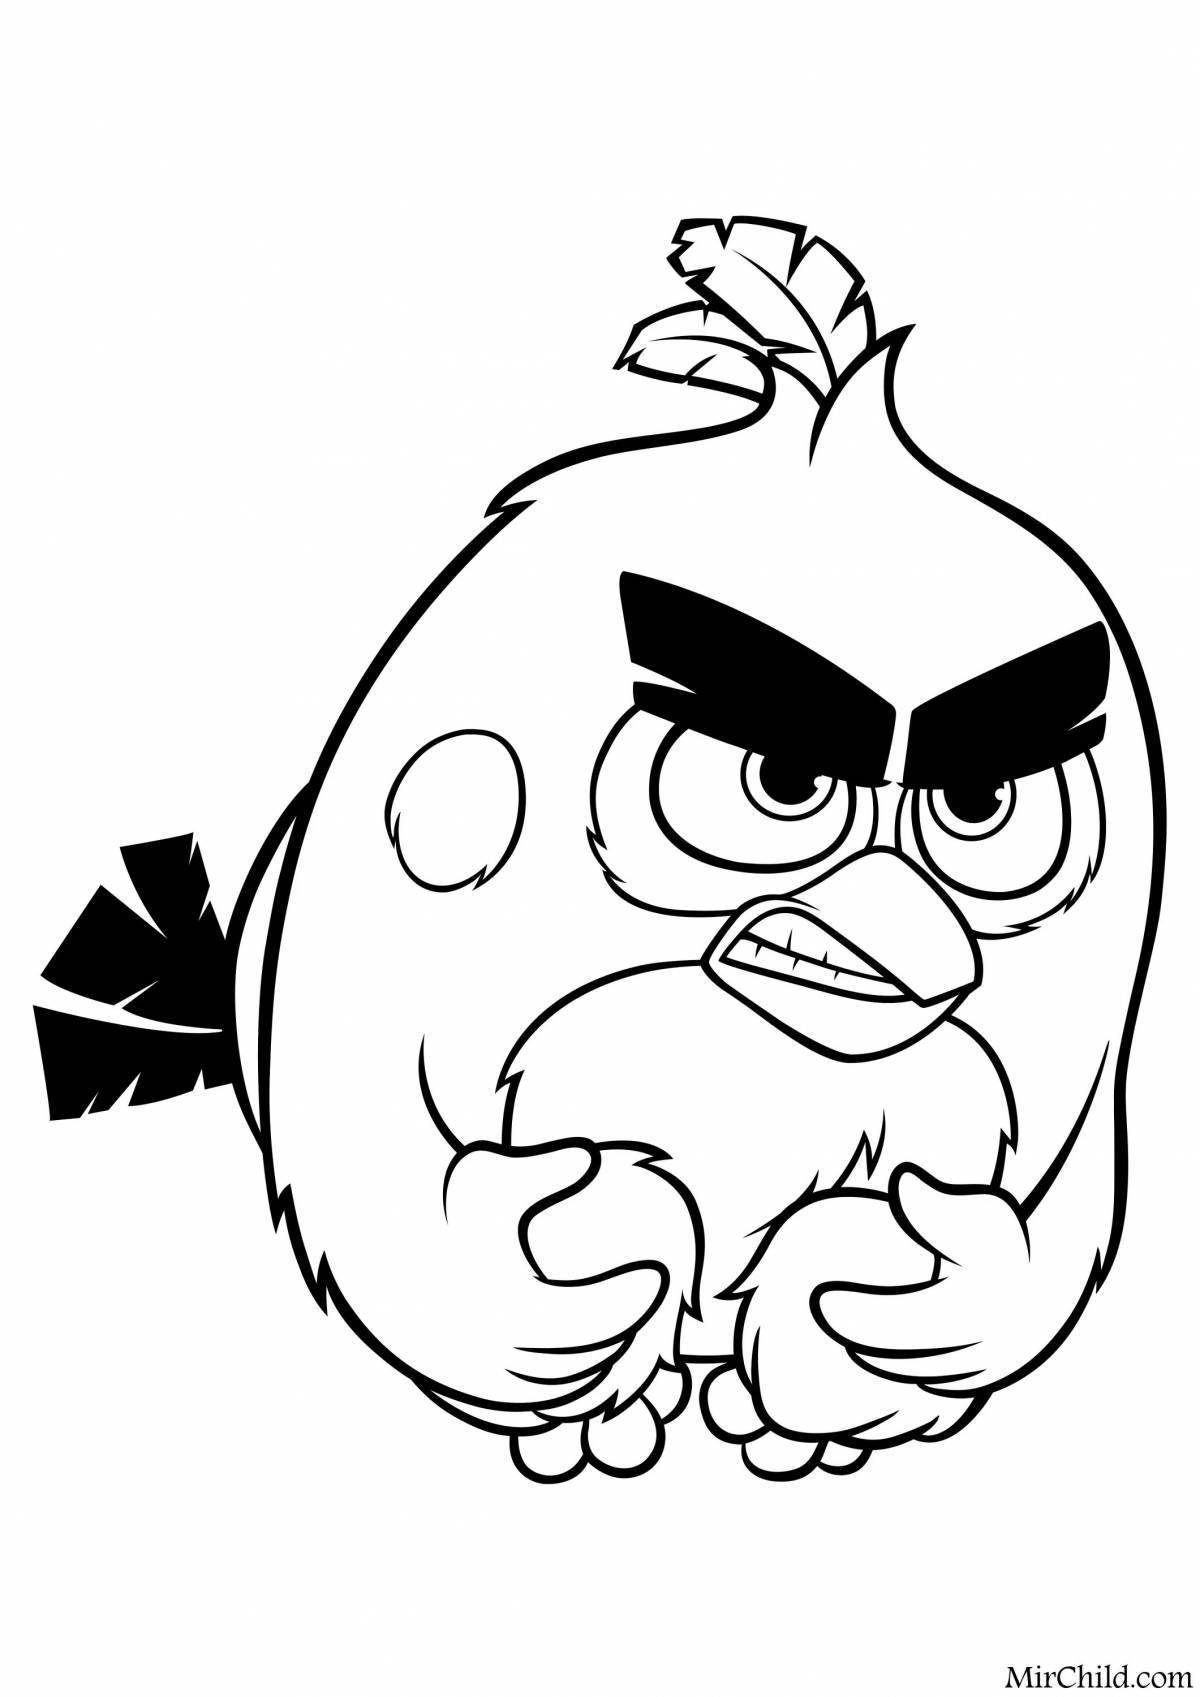 Creative angry birds coloring book for kids